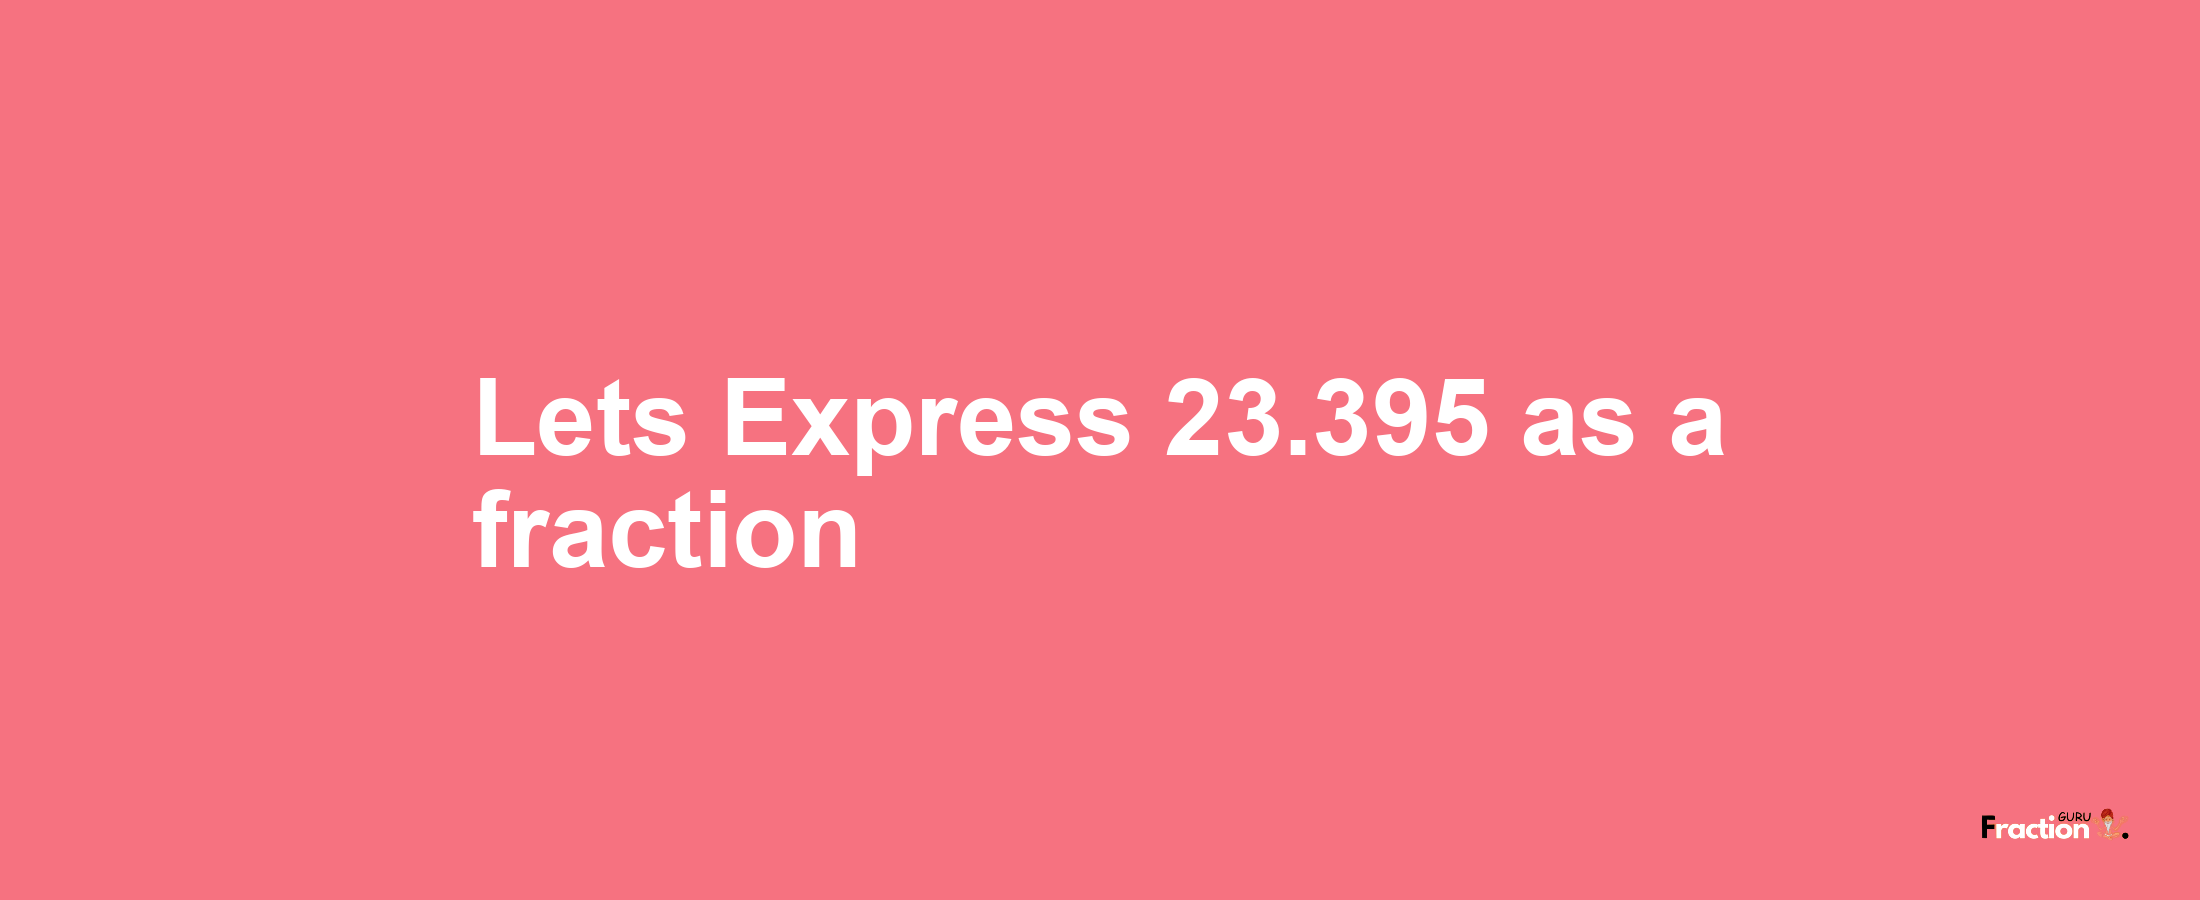 Lets Express 23.395 as afraction